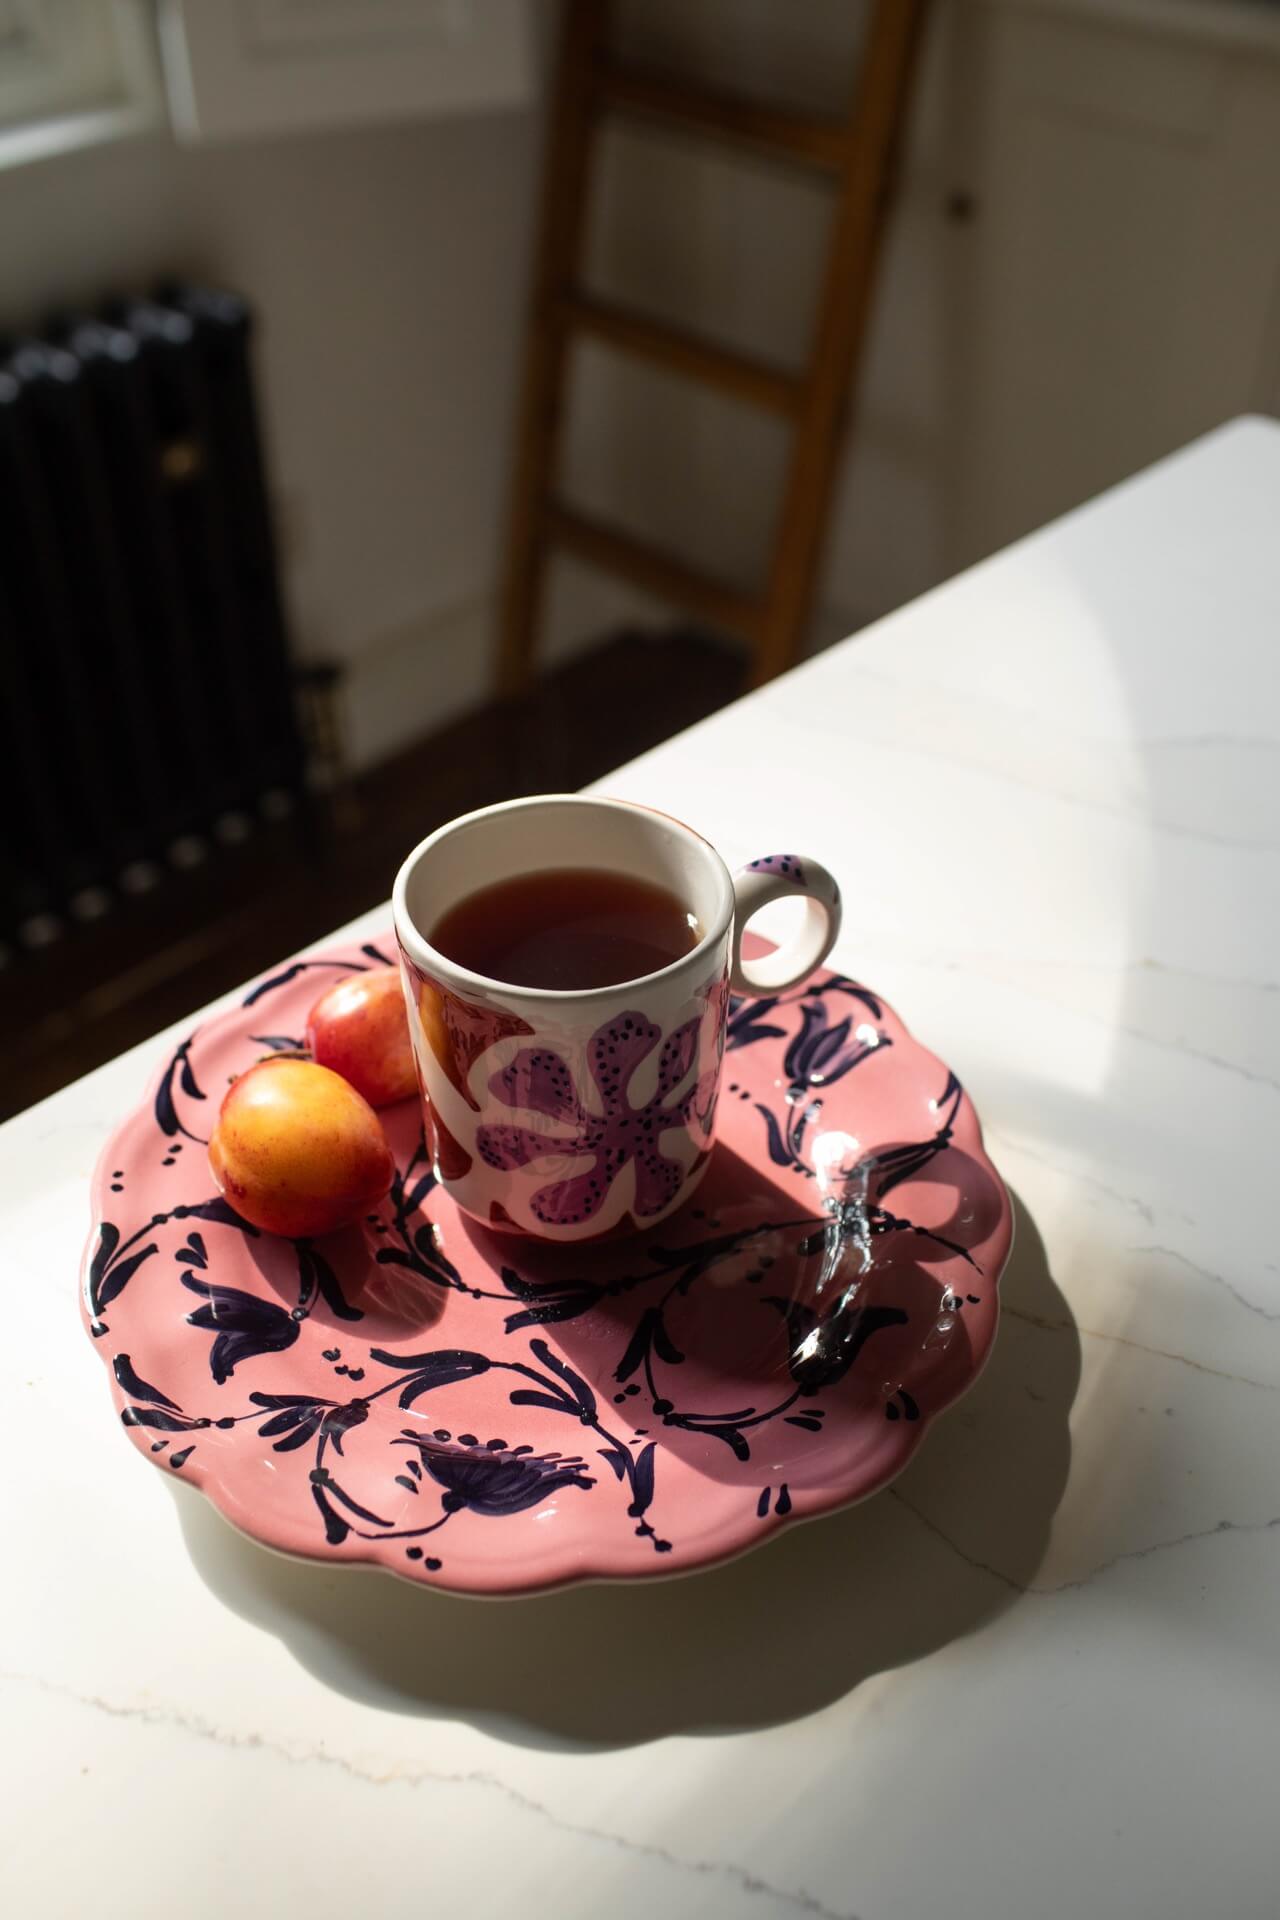 Colourful vintage antique style cup from independent UK contemporary homeware brand Vaisselle